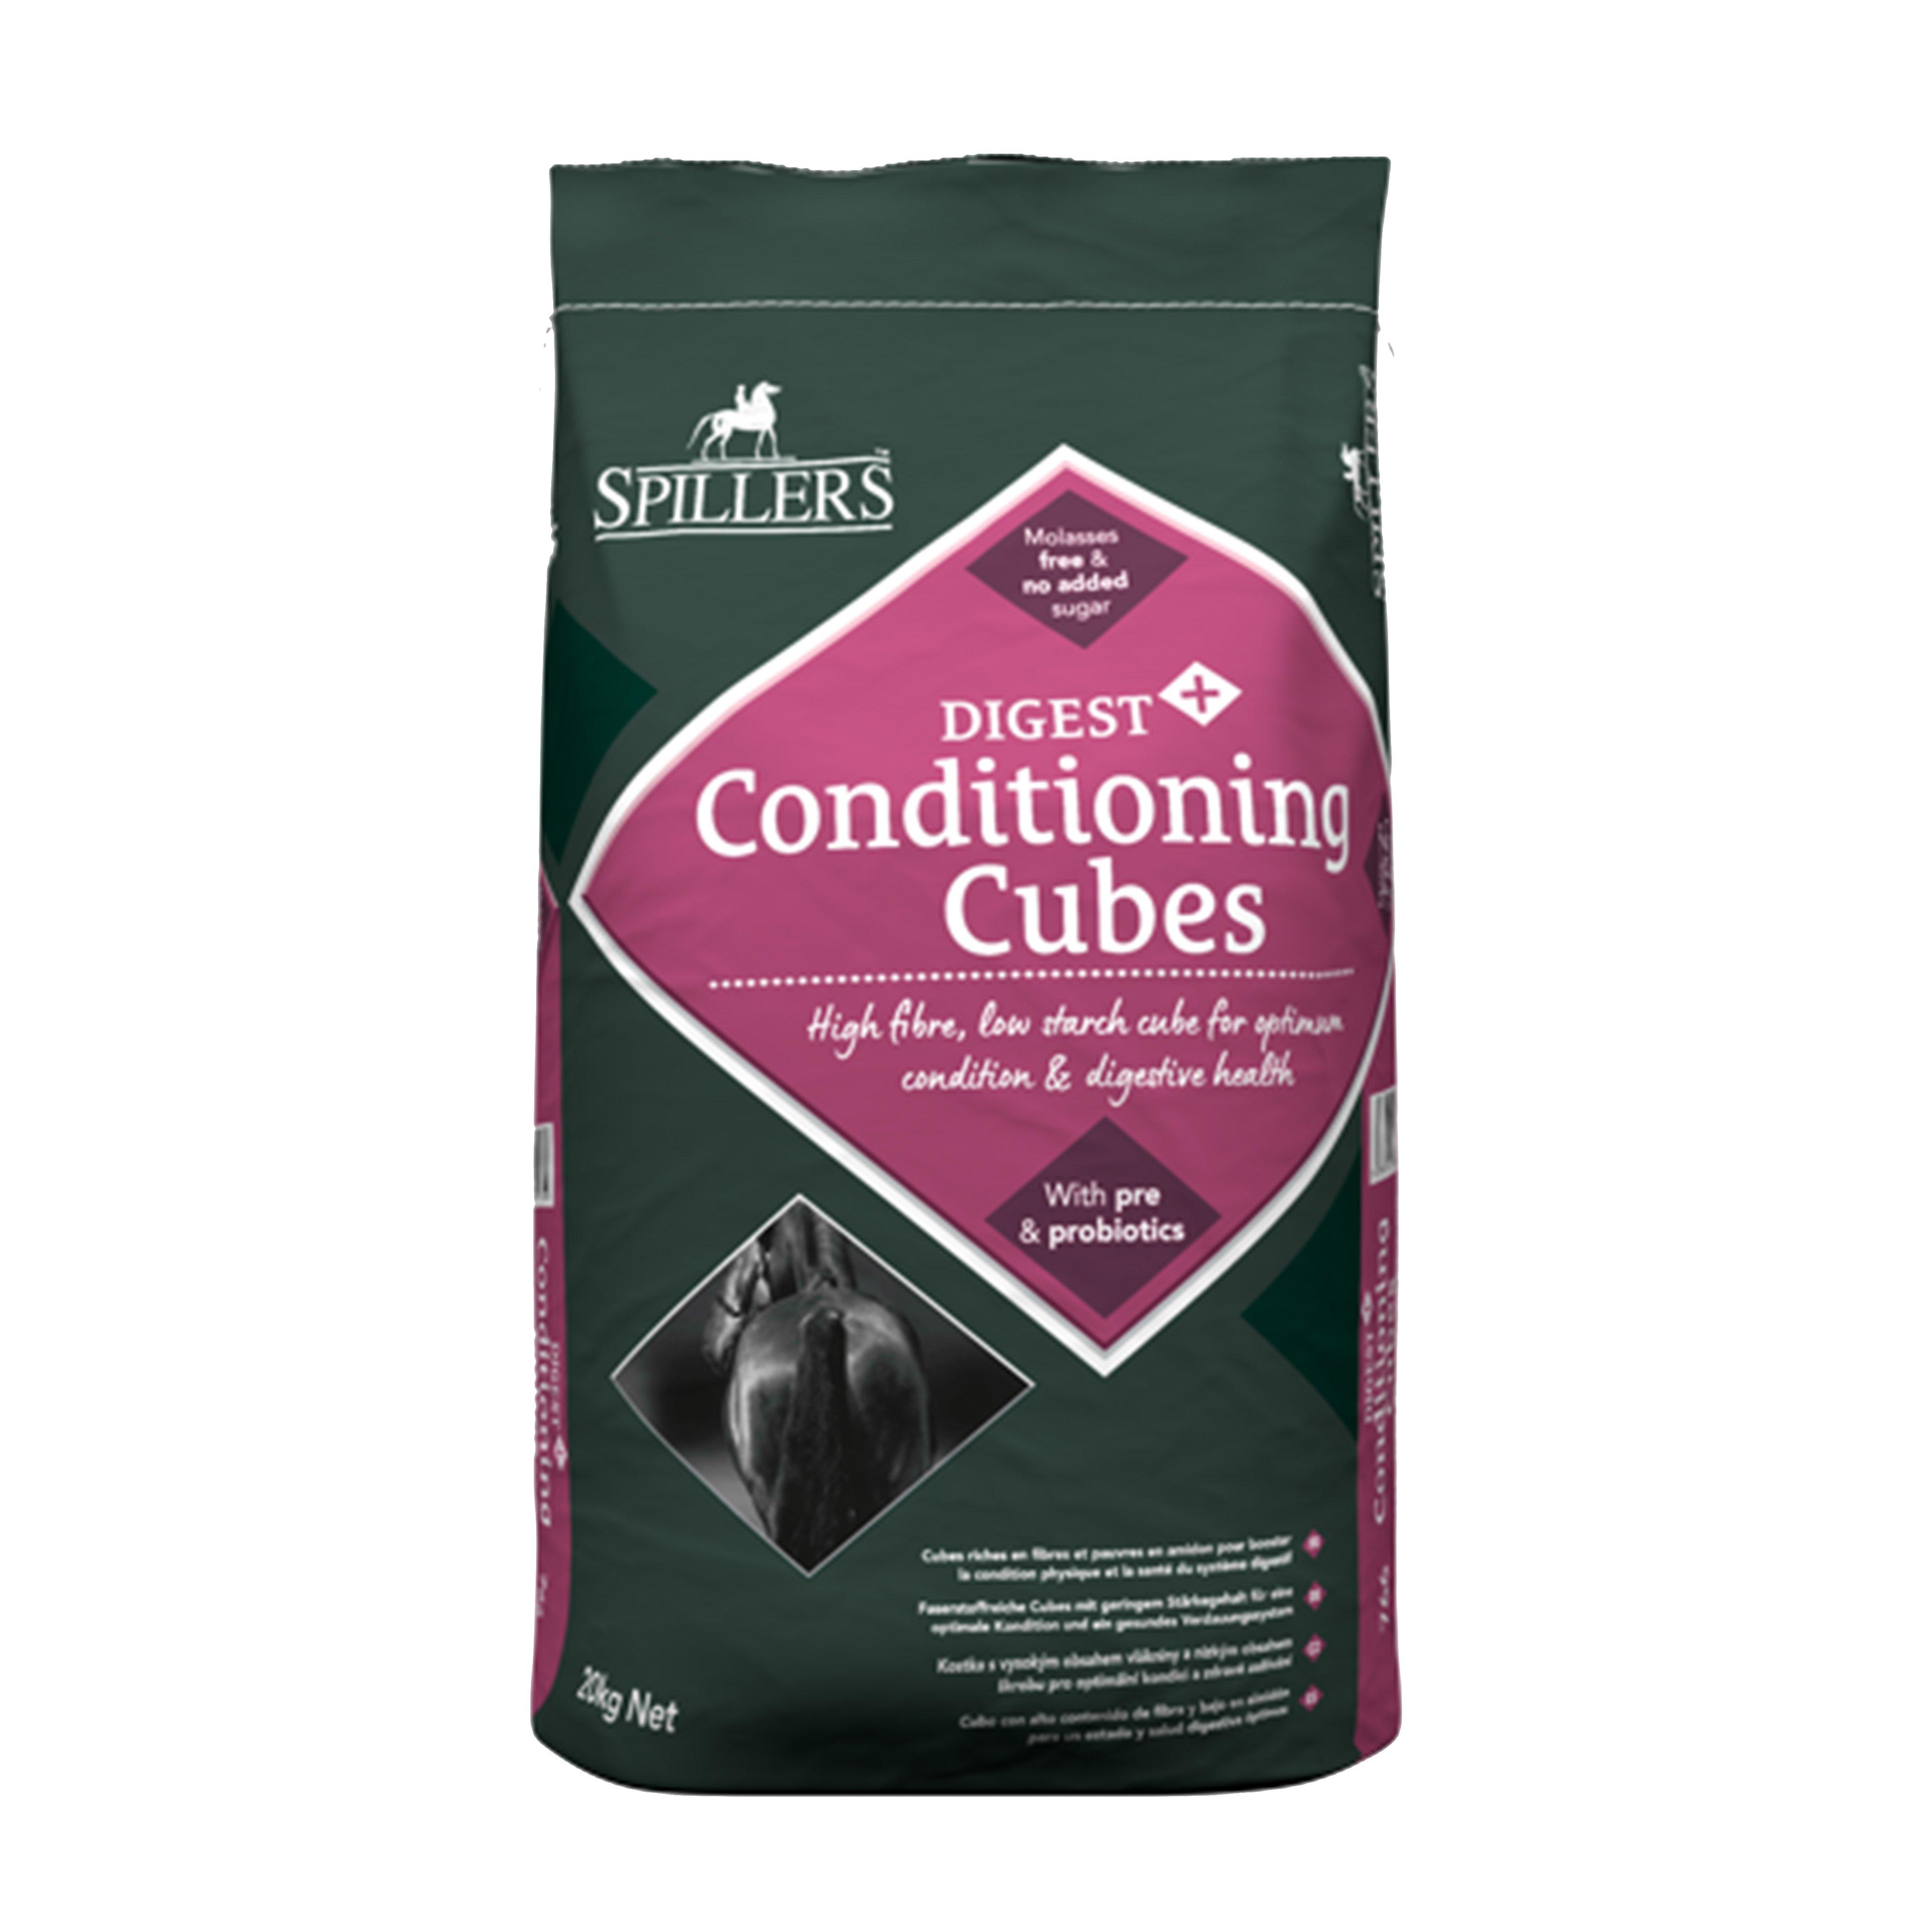 Conditioning Cubes